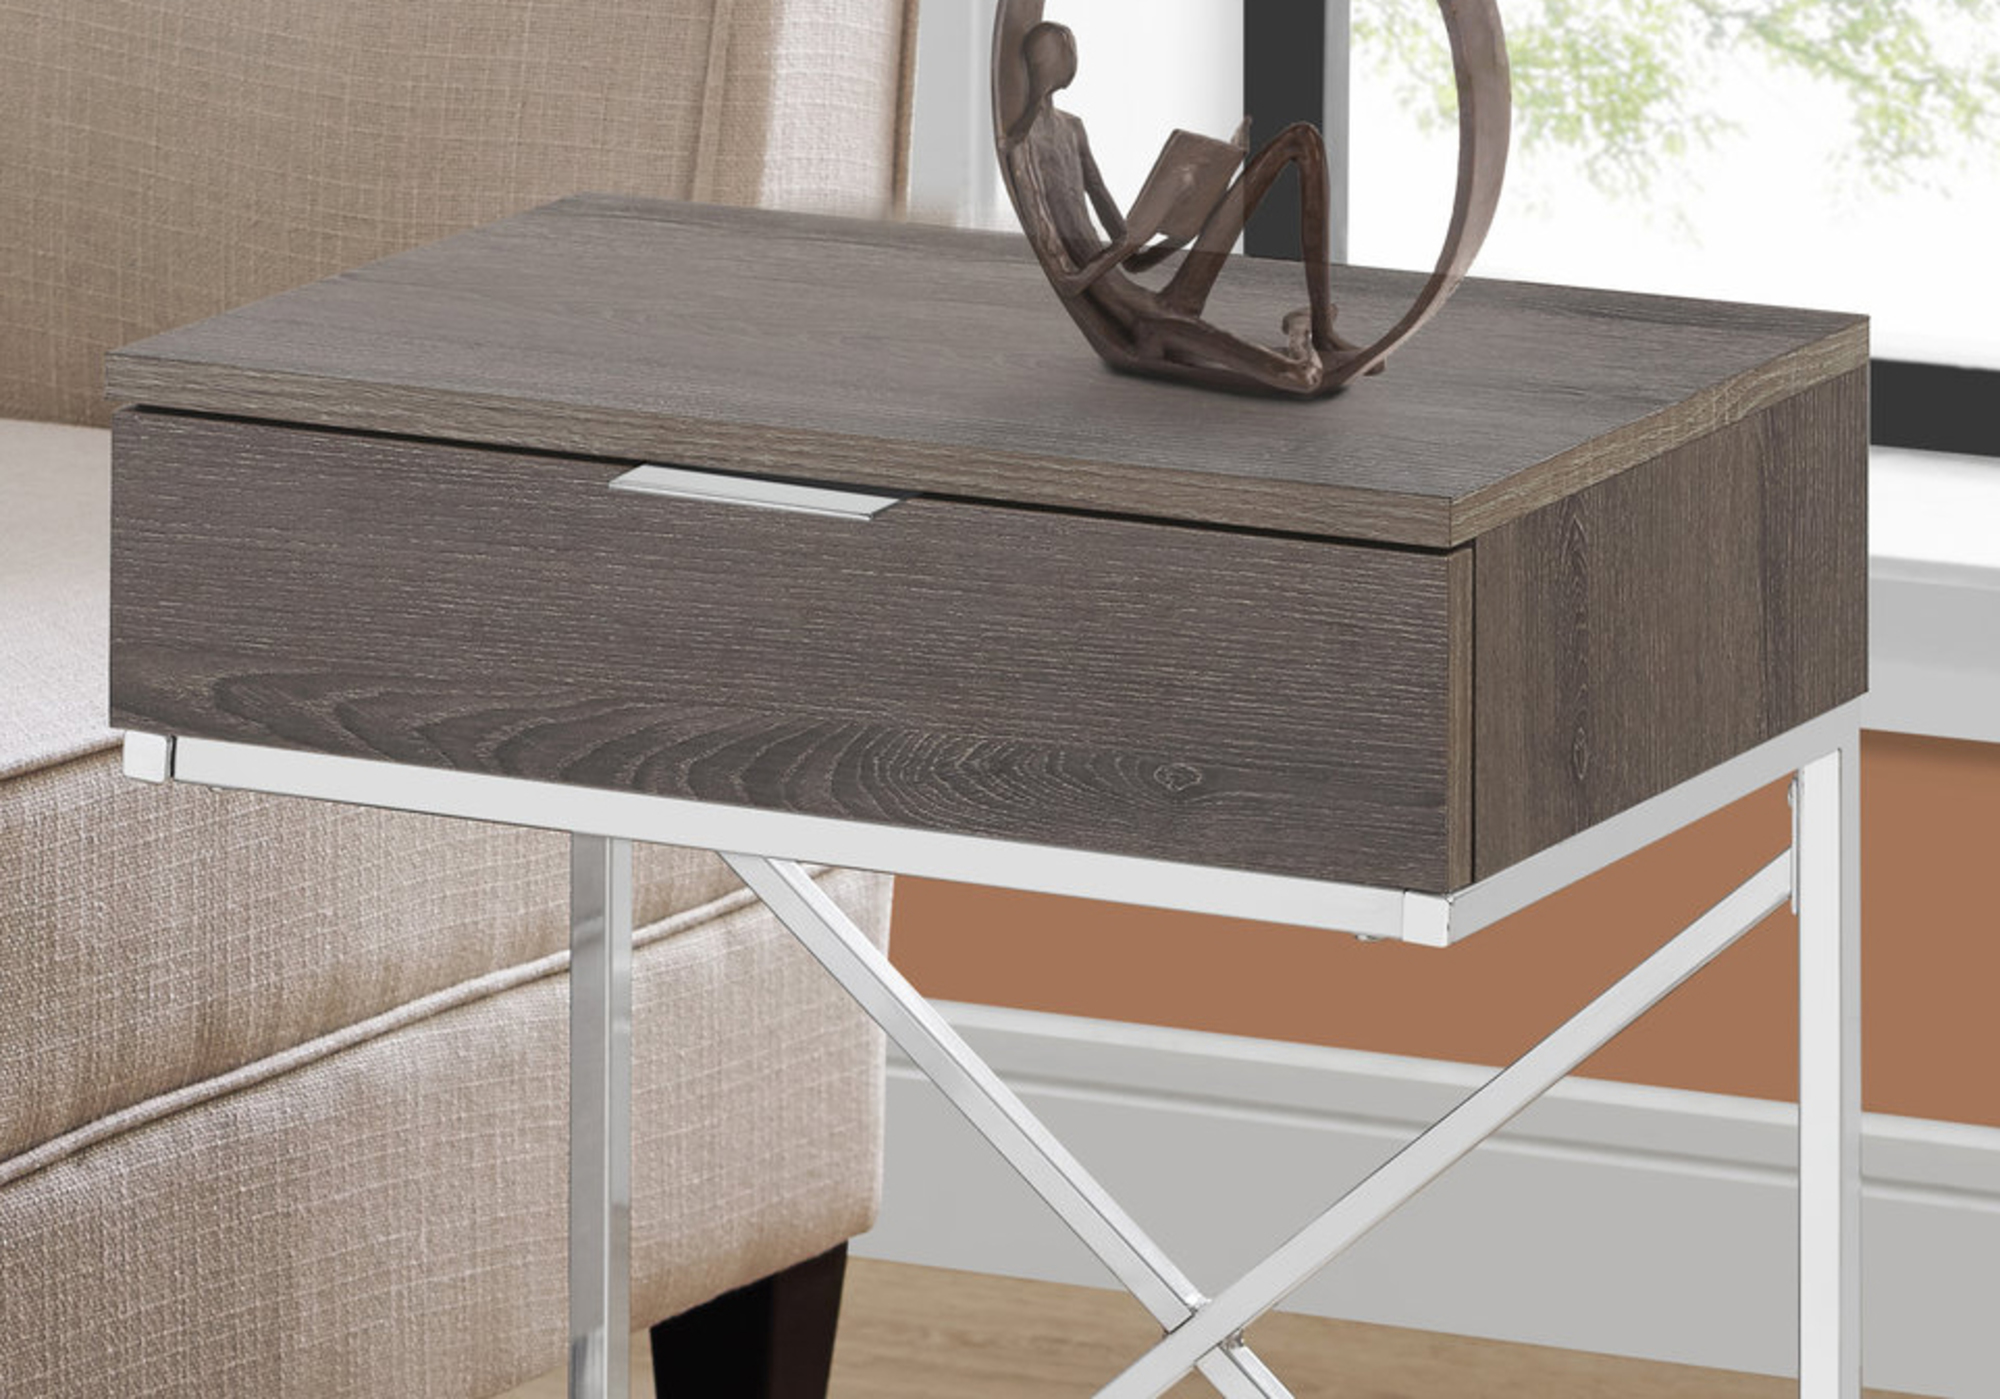 ACCENT END TABLE - 24"H / DARK TAUPE / CHROME METAL WITH DRAWER